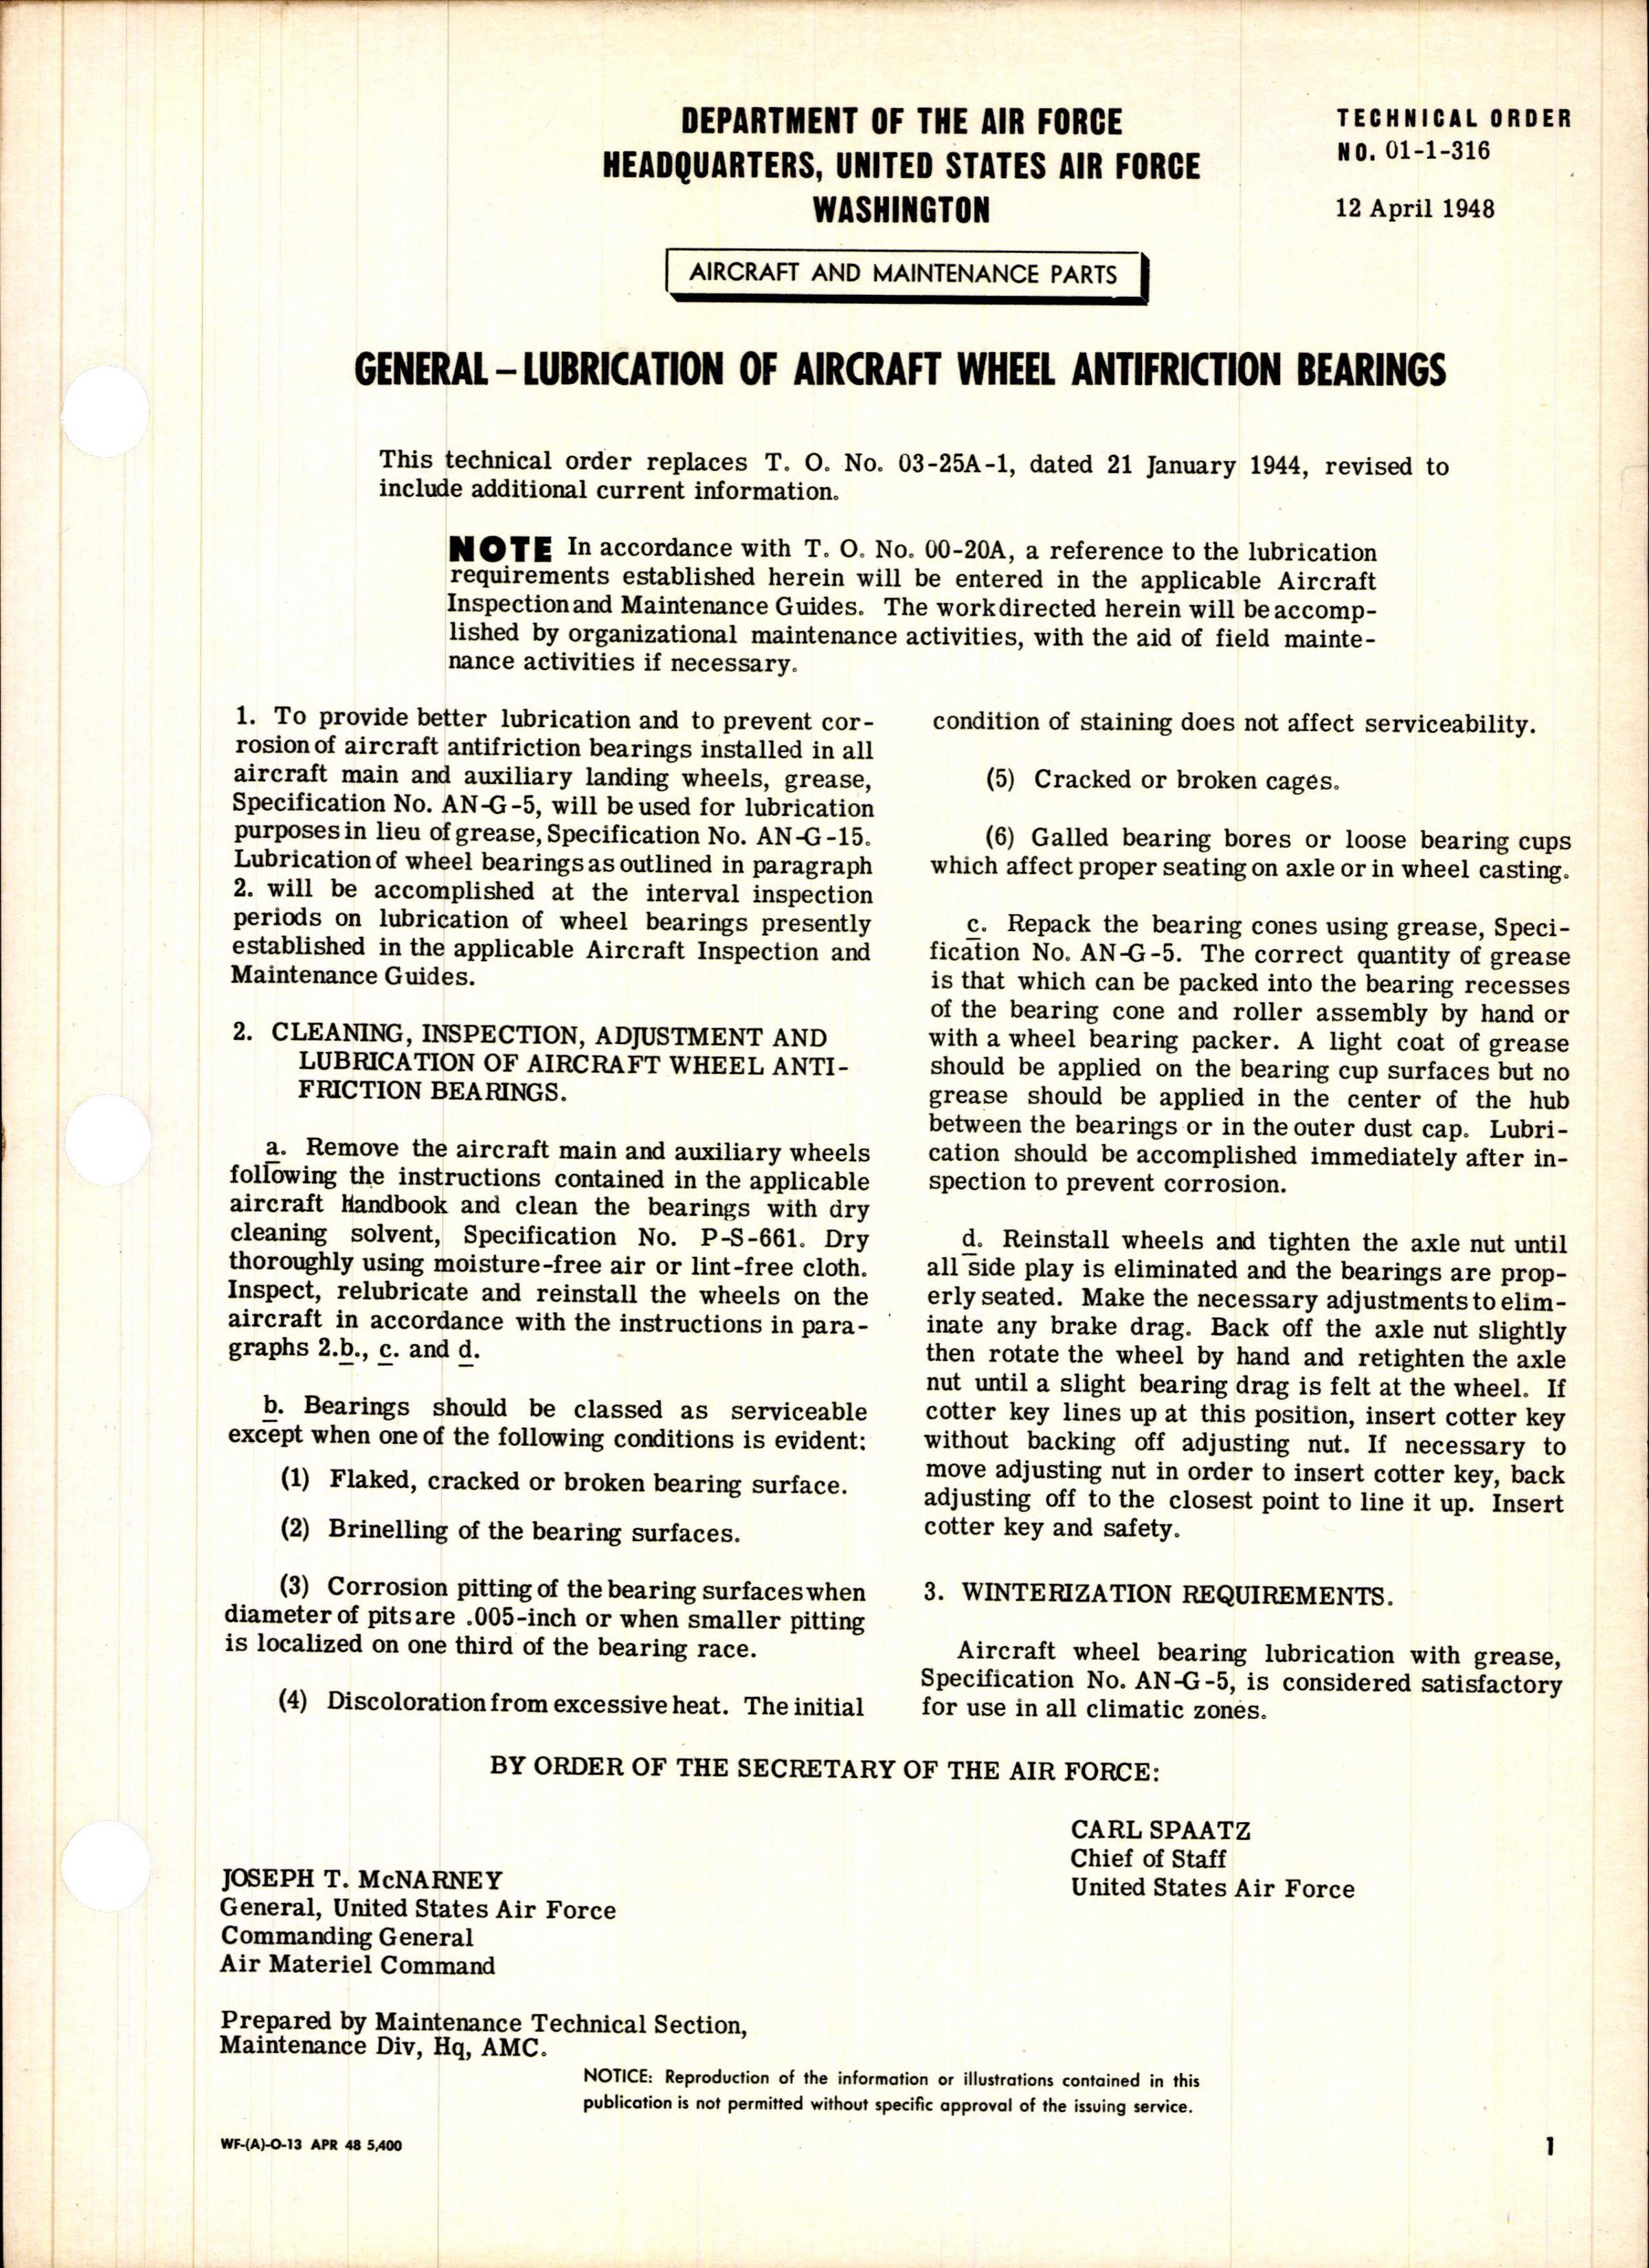 Sample page 1 from AirCorps Library document: Lubrication of Aircraft Wheel Antifriction Bearings